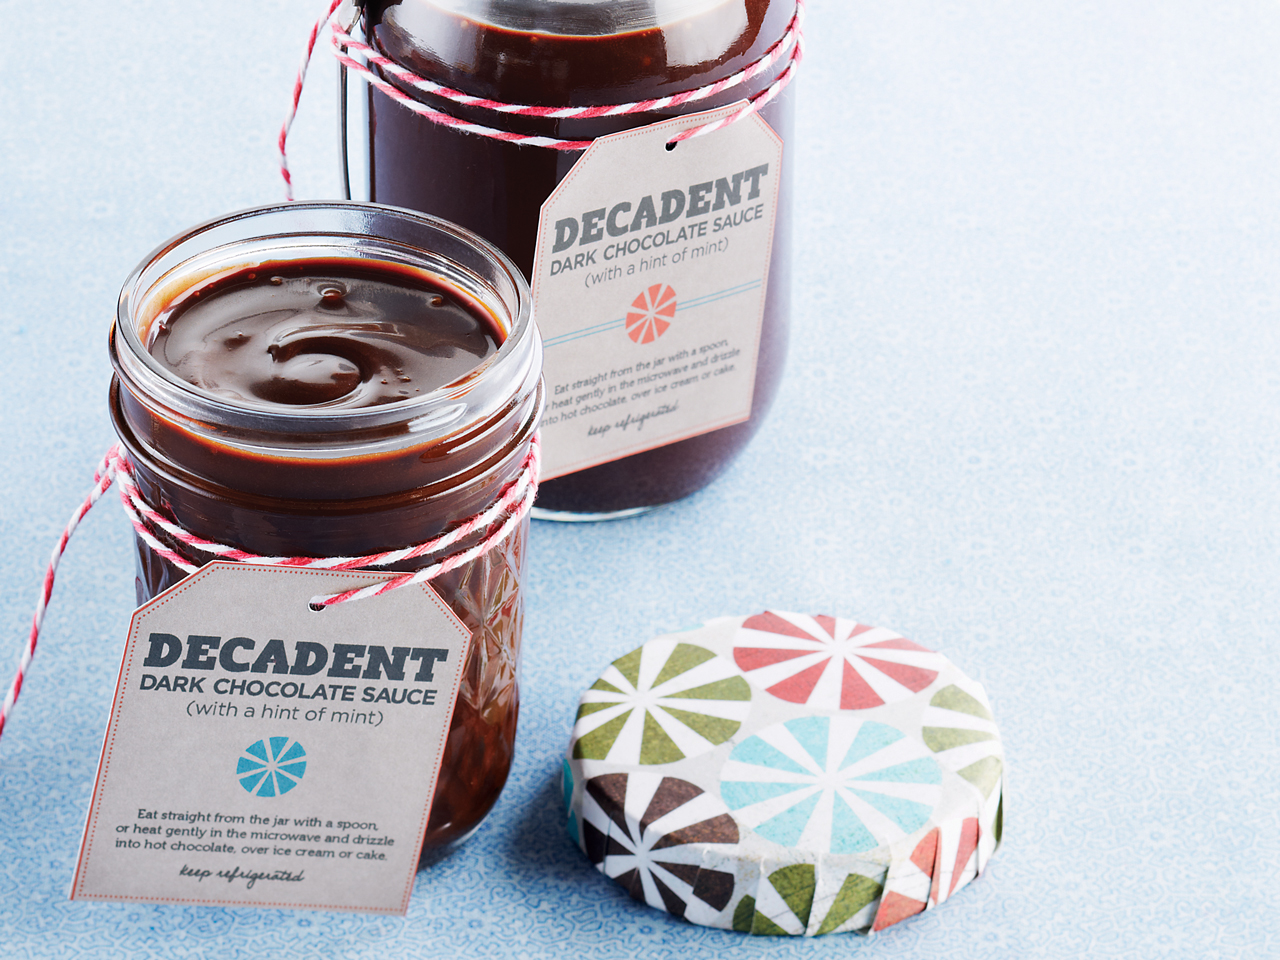 Decadent Dark Chocolate Sauce with a Hint of Mint